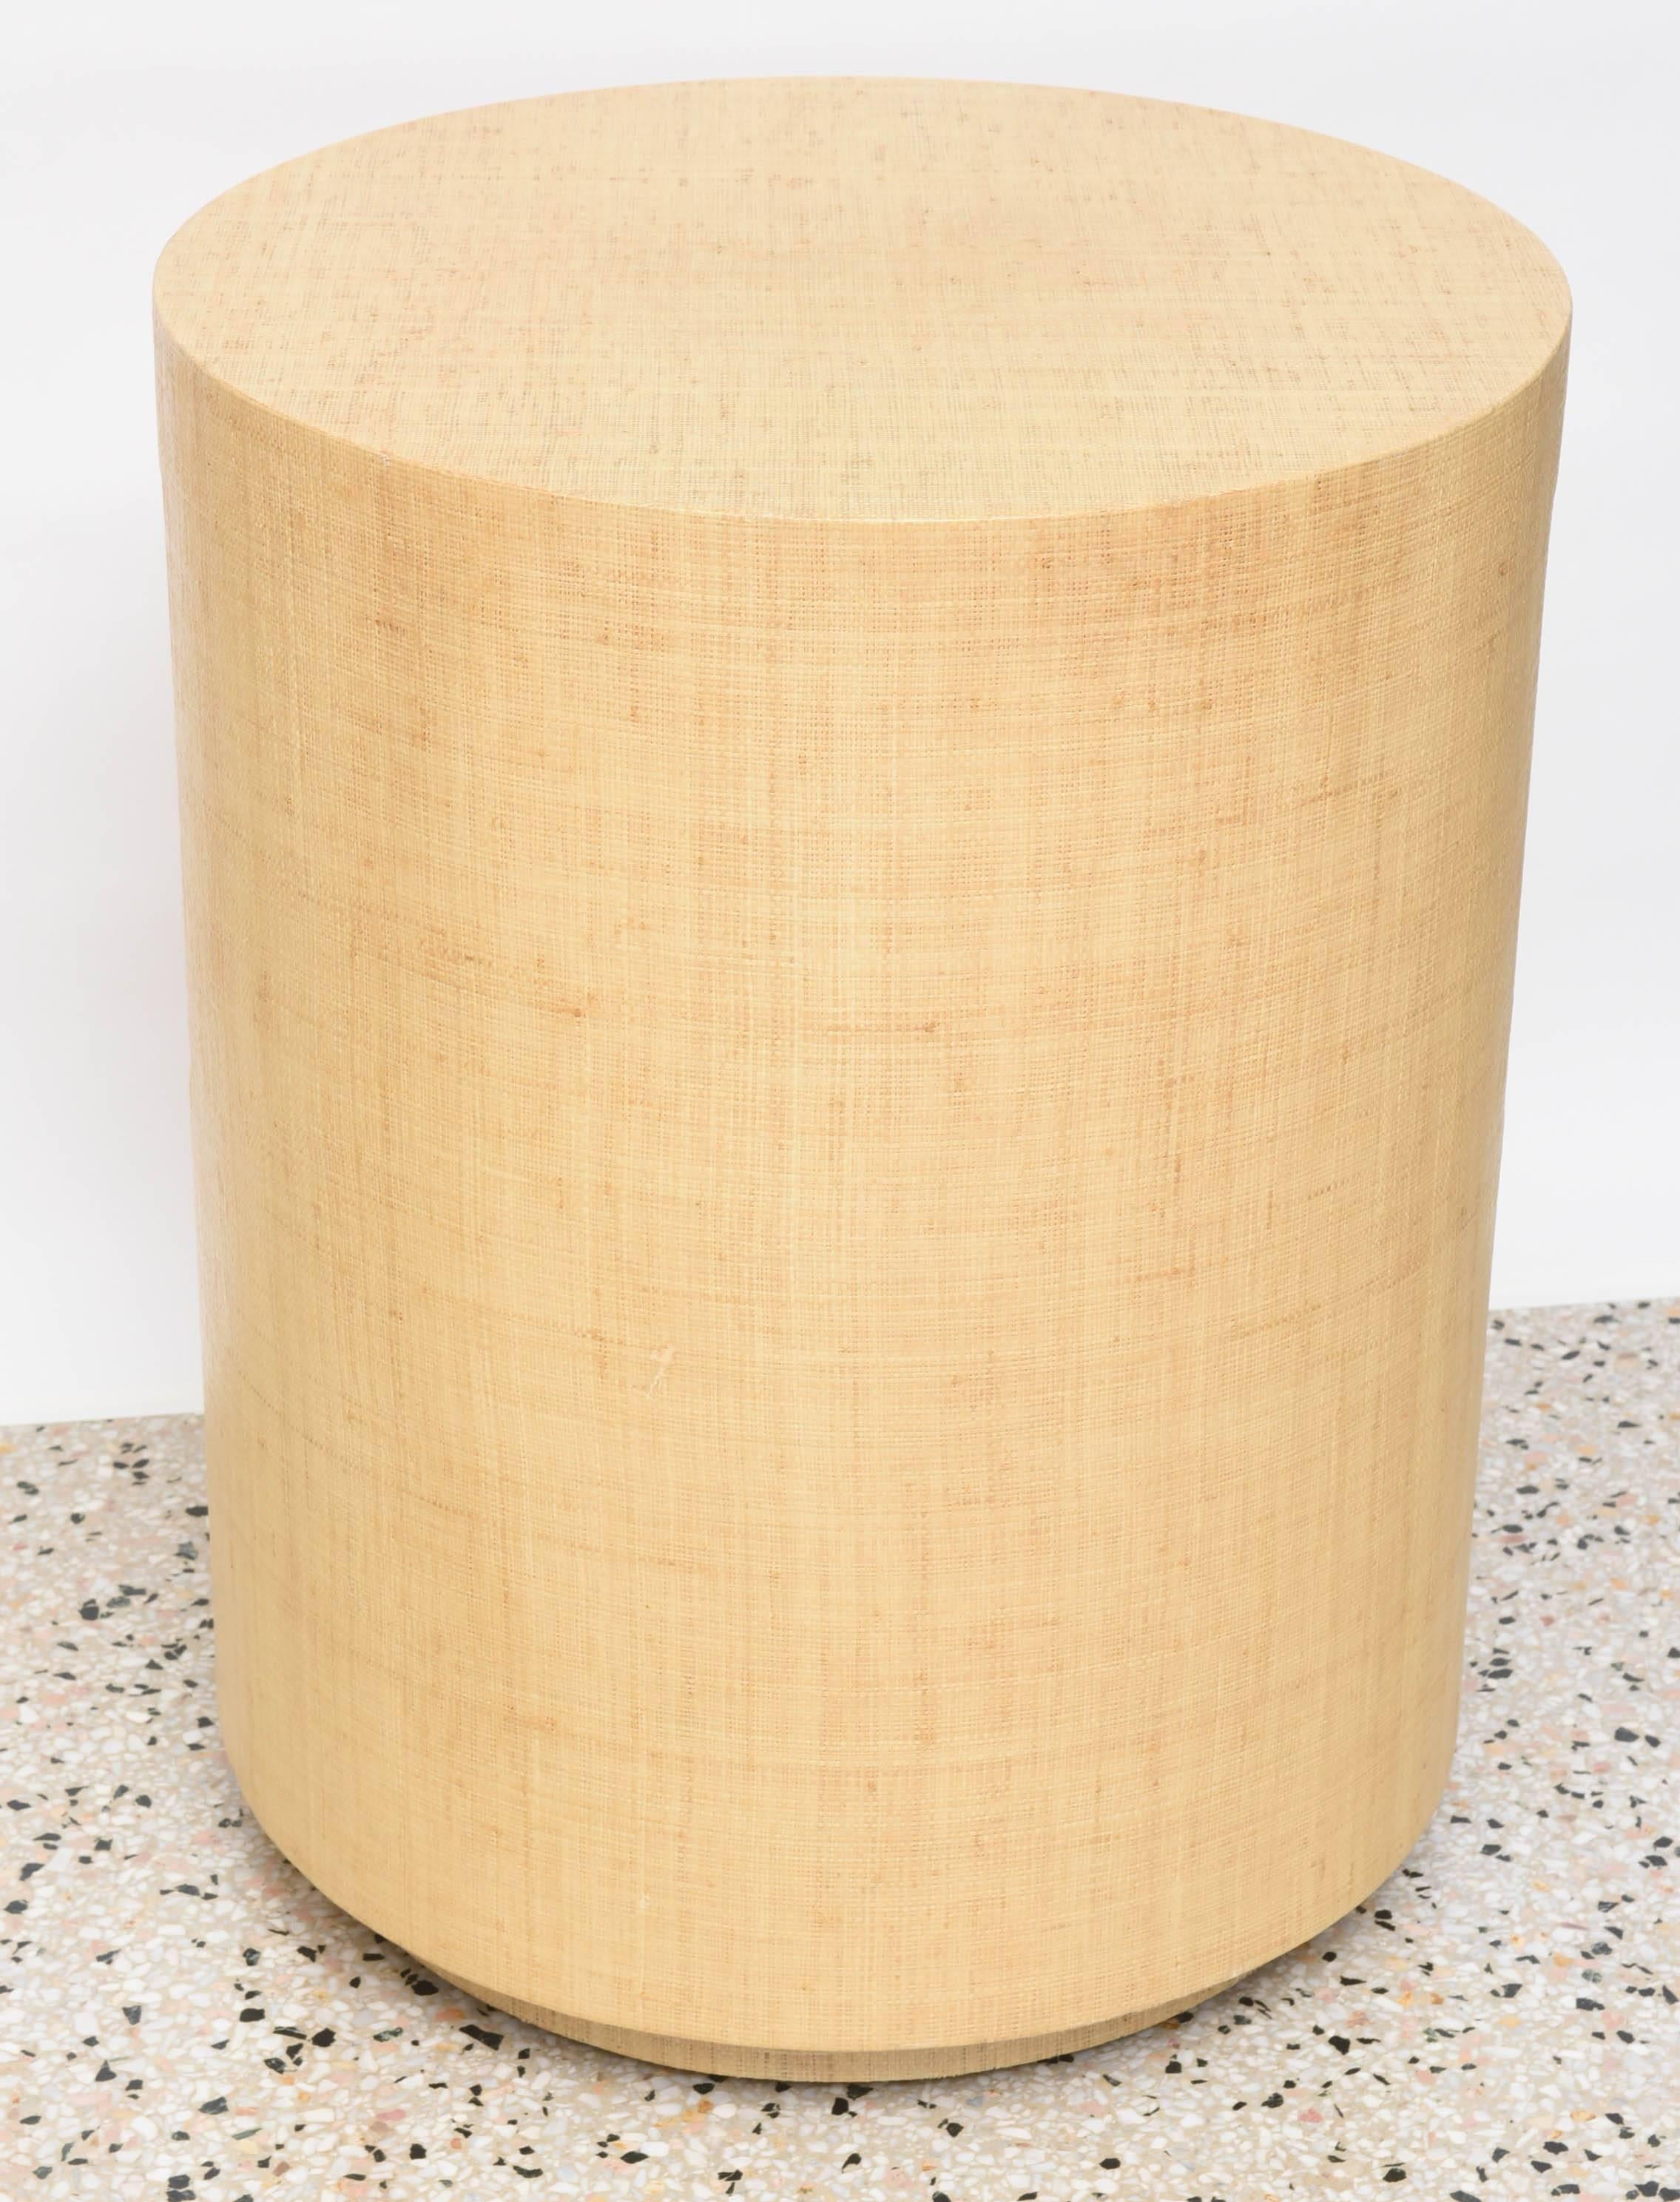 20th Century Circular Grass-Cloth Side Table Attributed to Karl Springer, American, 1970s